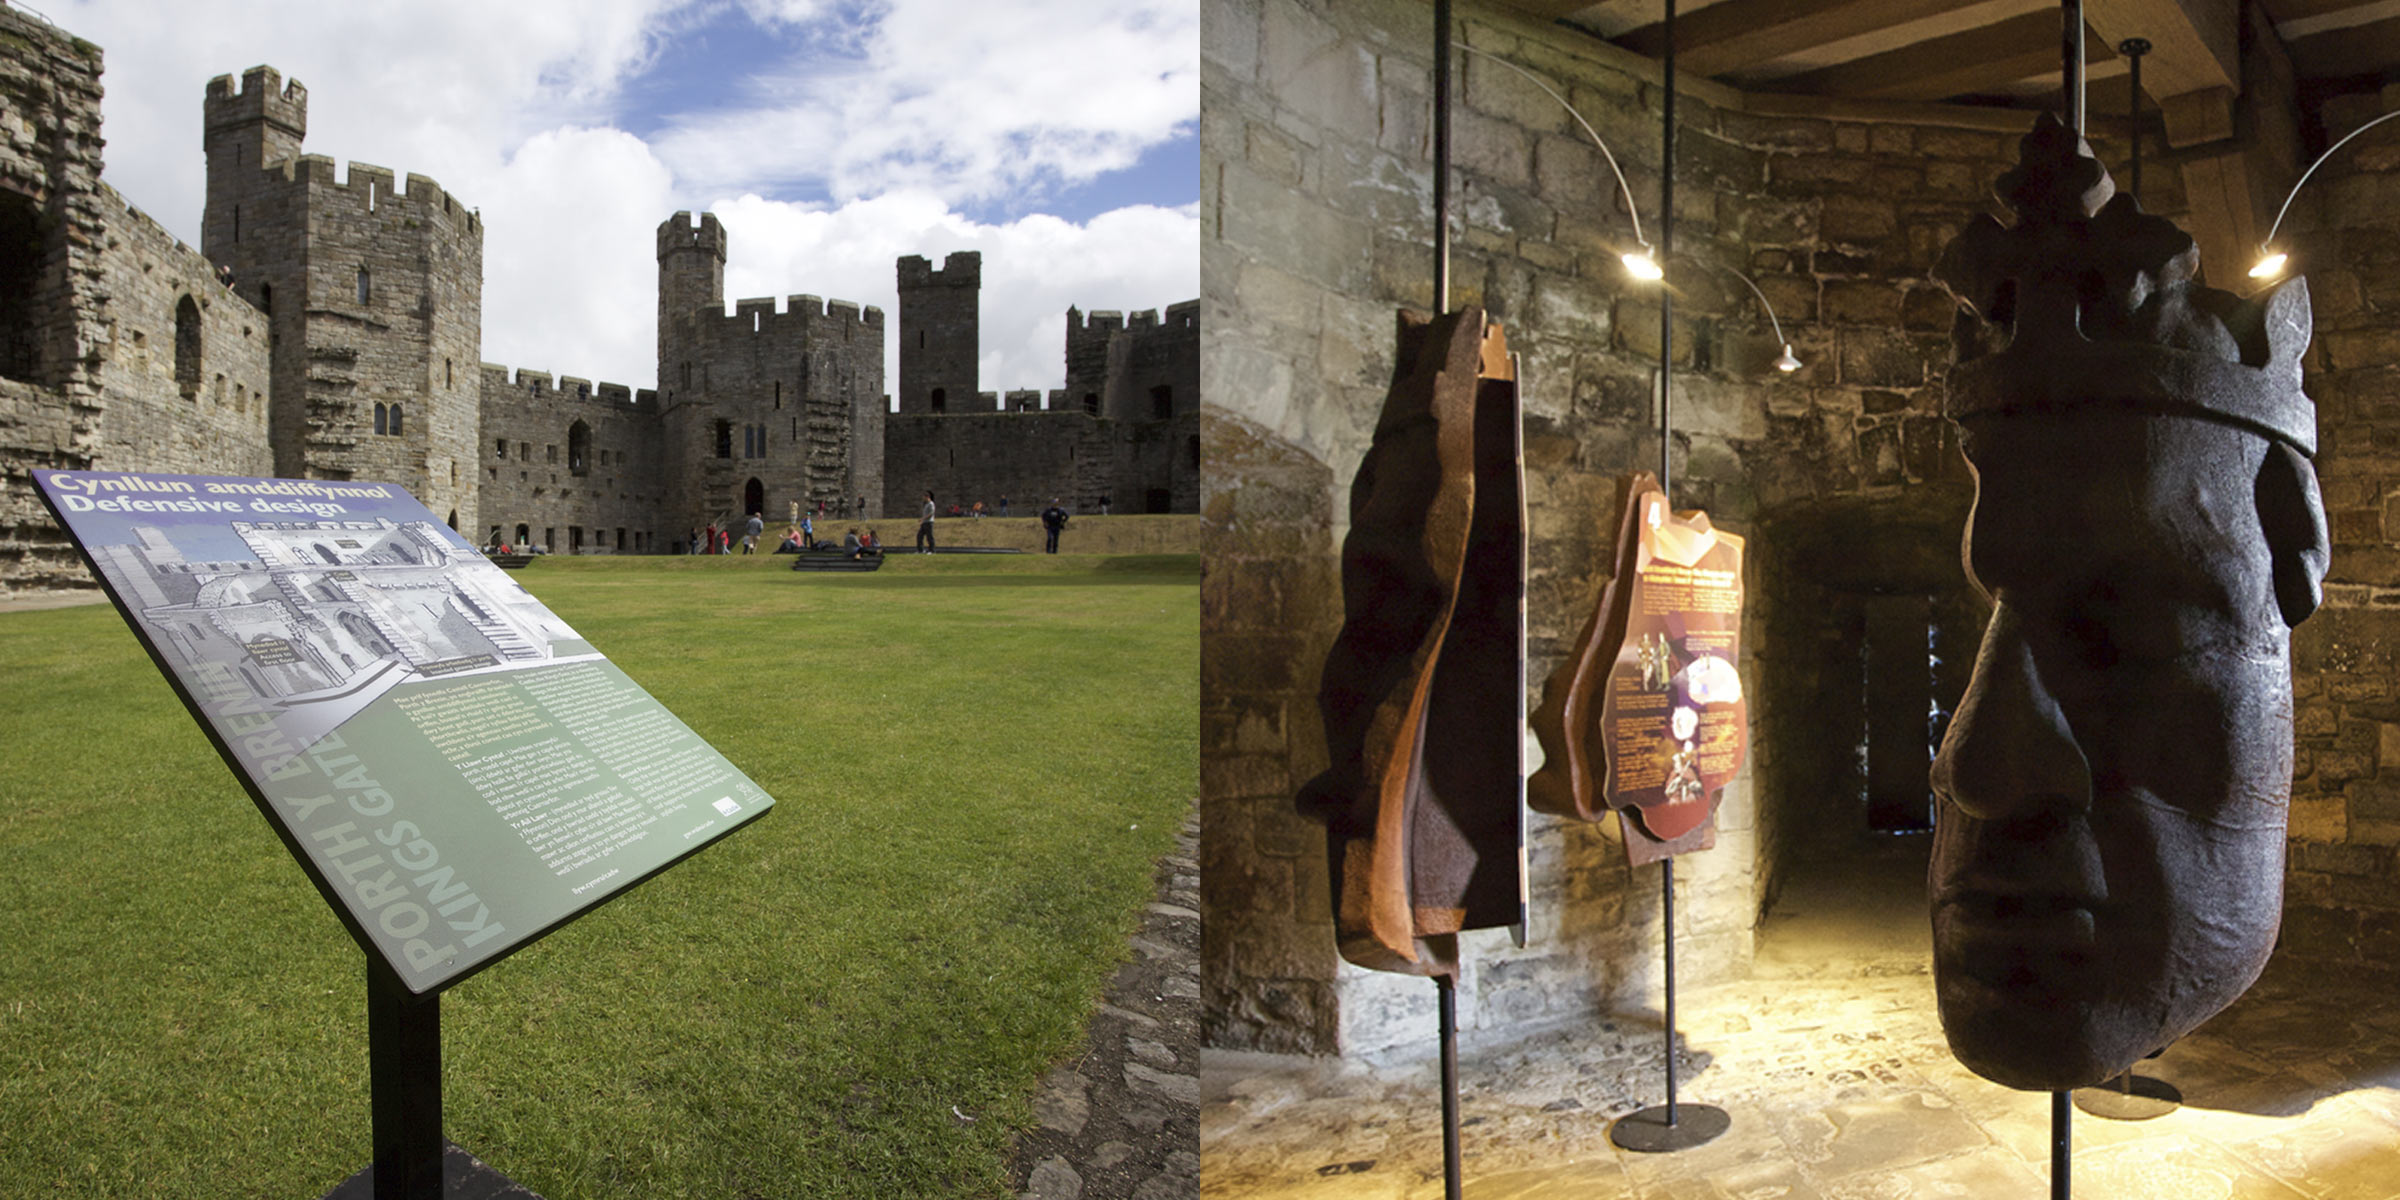 Montage of interpretation installations at Caernarfon Castle, Wales, for cadw Welsh Government